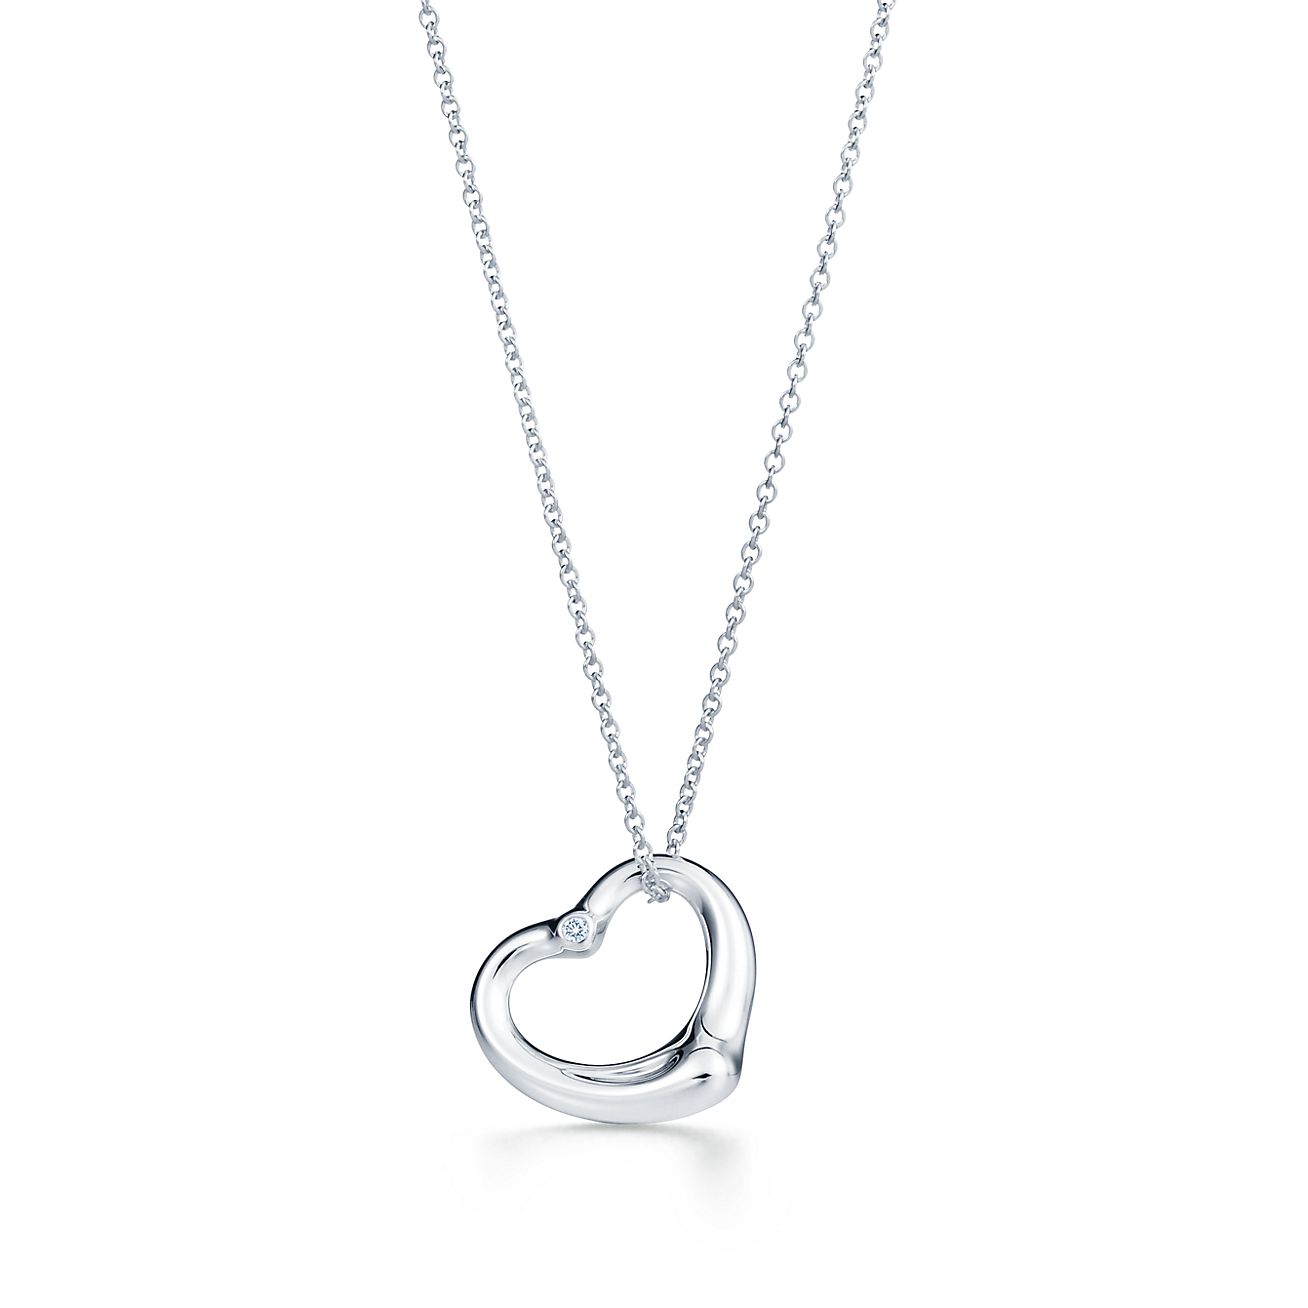 Return to Tiffany™ oval tag necklace in sterling silver, 15.5